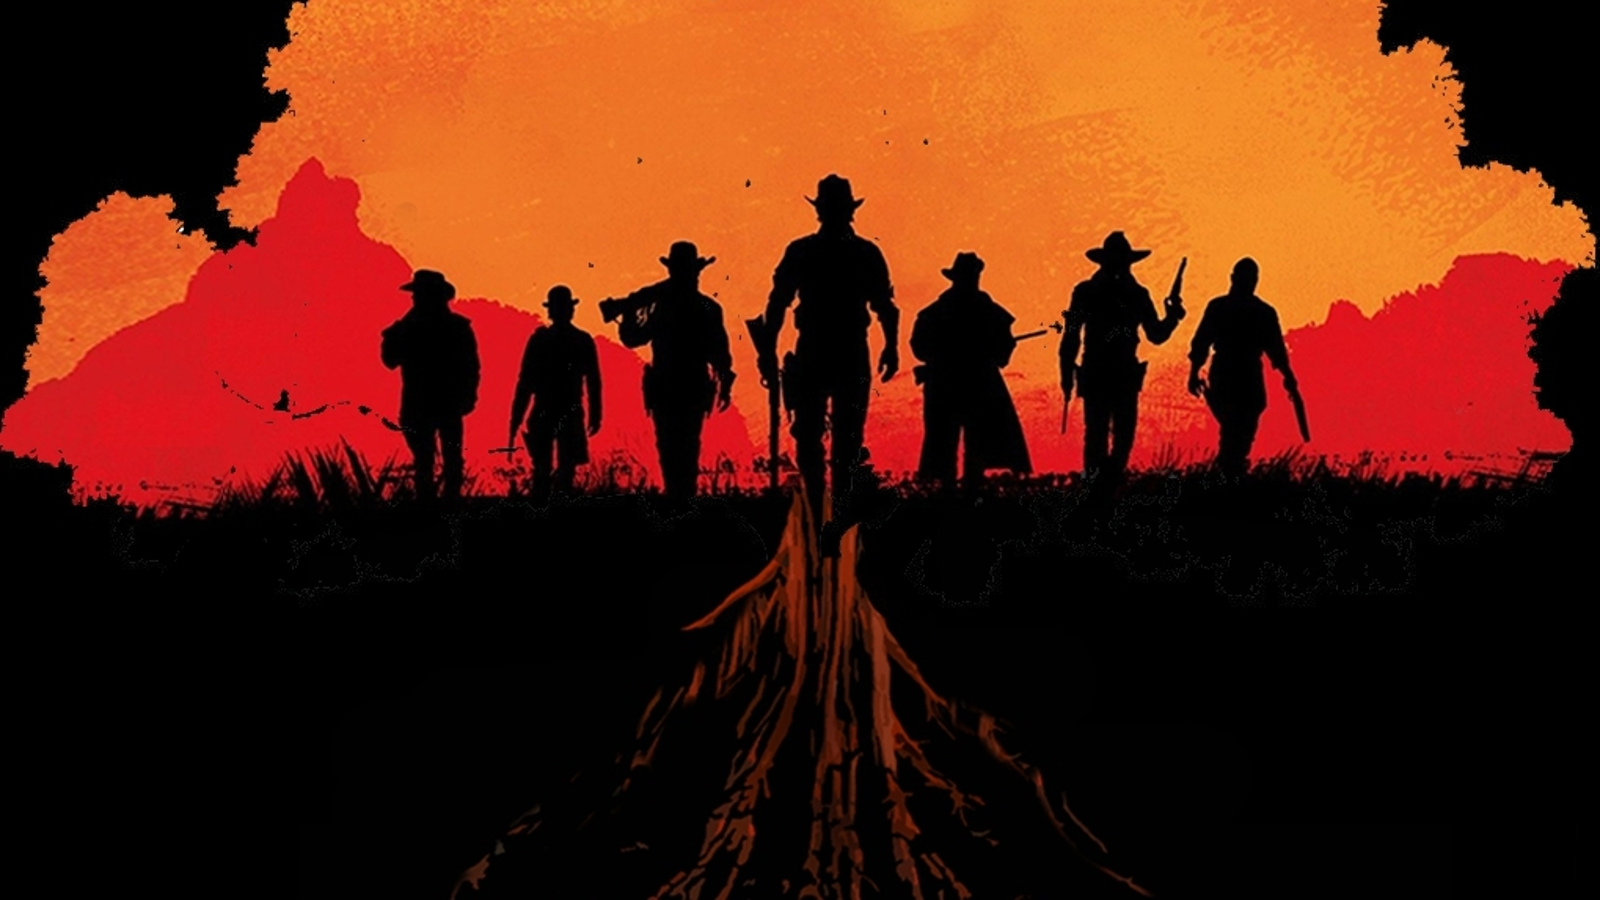 Up For Debate - Red Dead Redemption 2 off to slow Steam launch, did anyone  bother to wait?